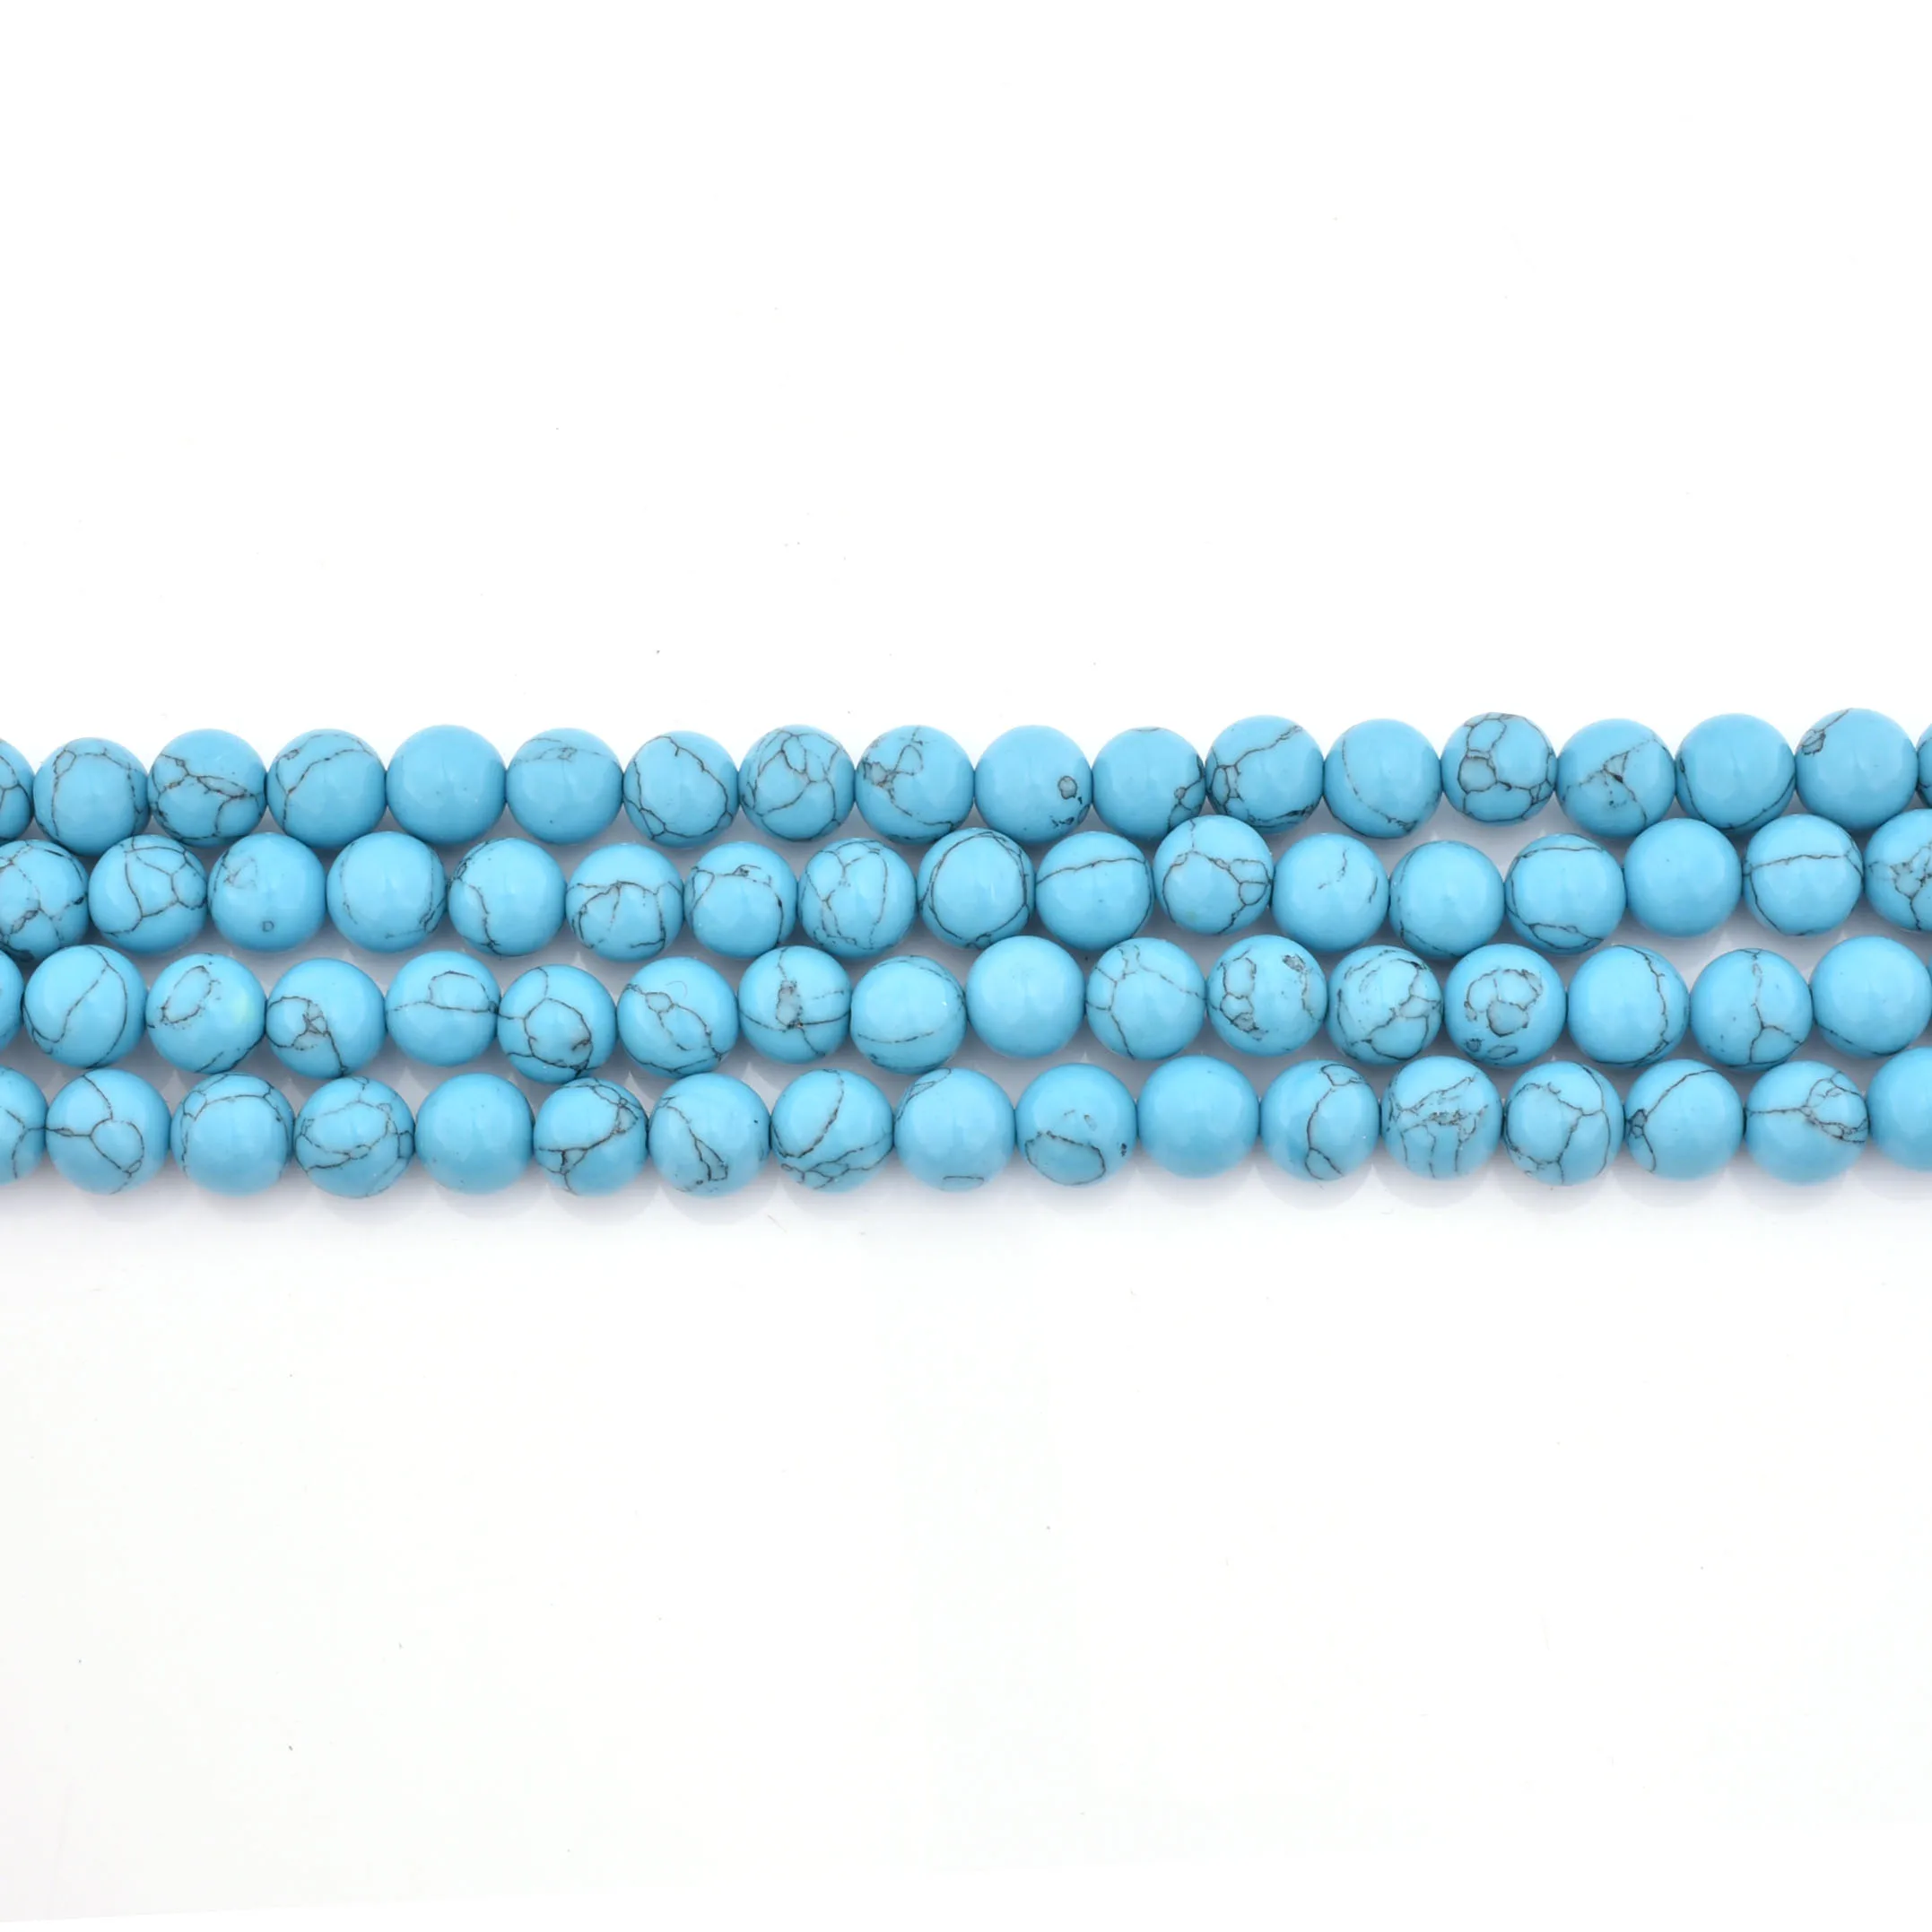 

Blue Turquoise Handmade Natural Indonesia Gemstone Stone Wholesale Loose Bead Strand, Please see the details bead color chart